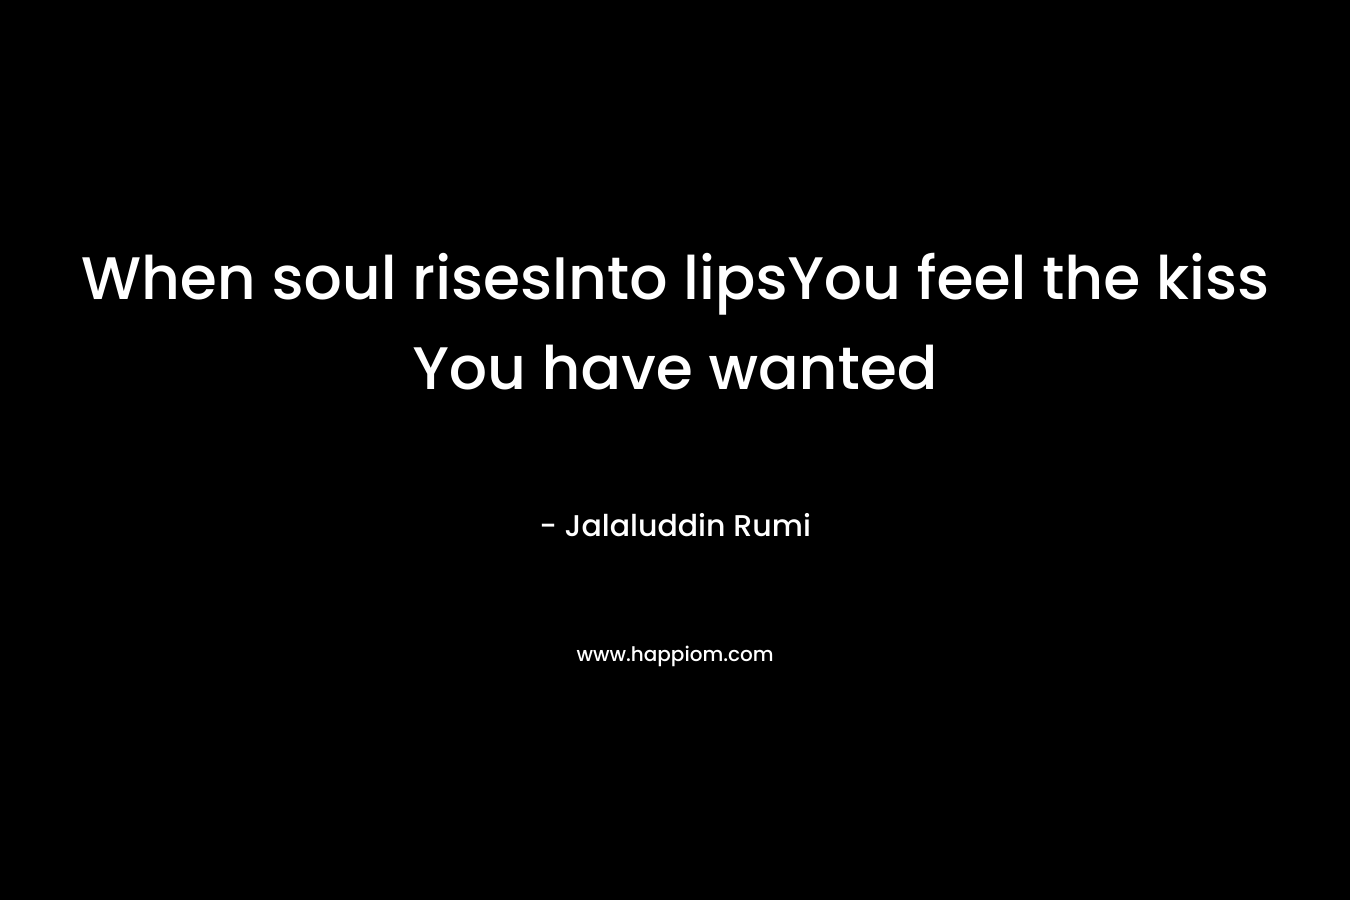 When soul risesInto lipsYou feel the kiss You have wanted – Jalaluddin Rumi